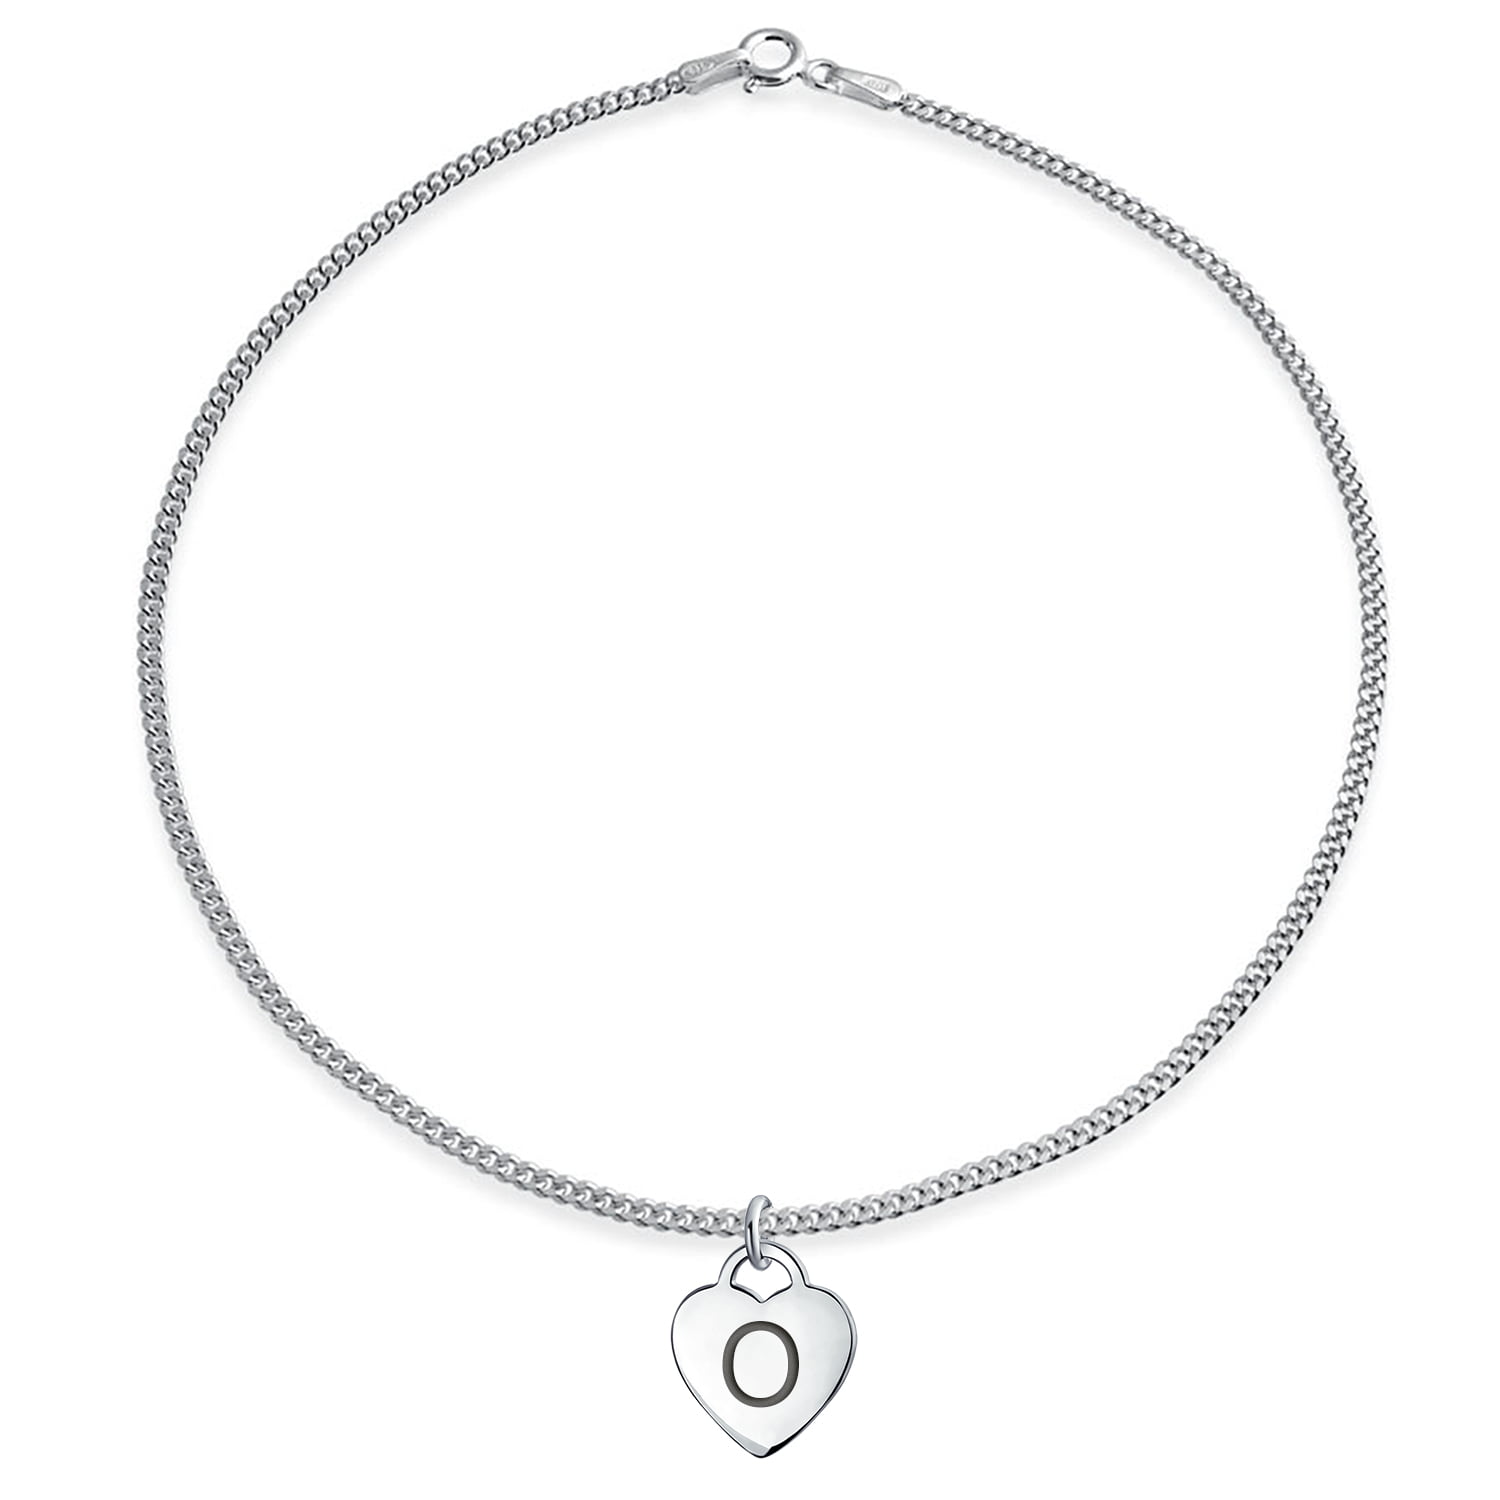 TOOPNK Heart Initial Anklet for Women Letter Anklet Dainty Chain Anklet with Initials Silver Ankle Bracelets for Girl Beach Jewelry